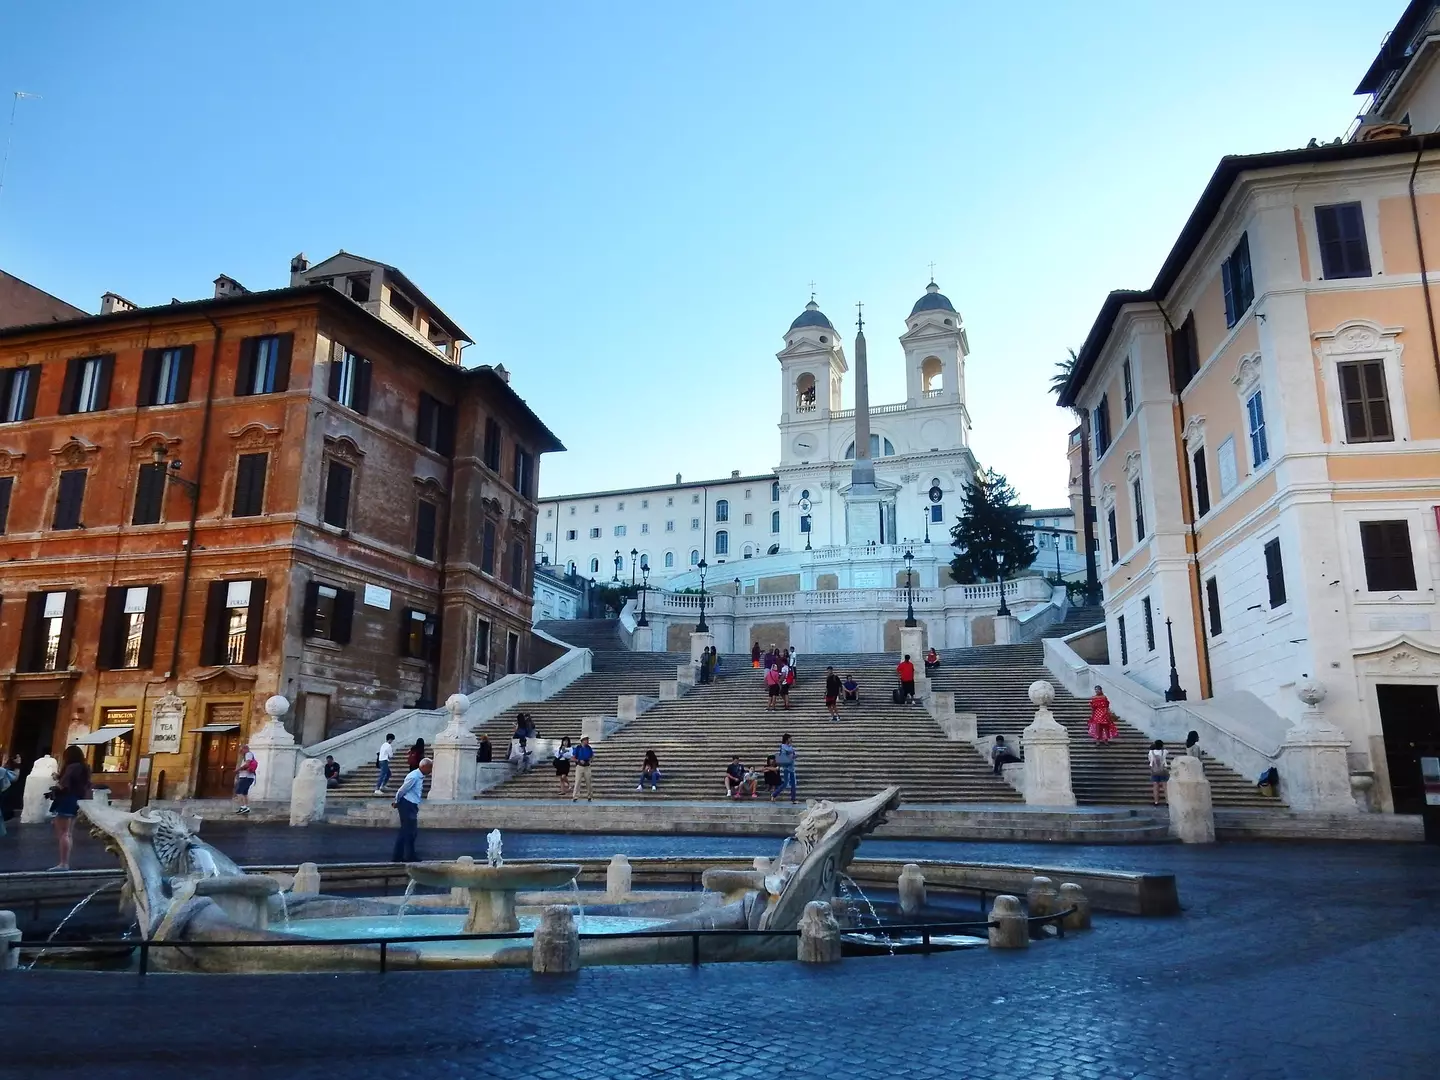 The Spanish Steps were made famous by the 1953 film Roman Holiday.